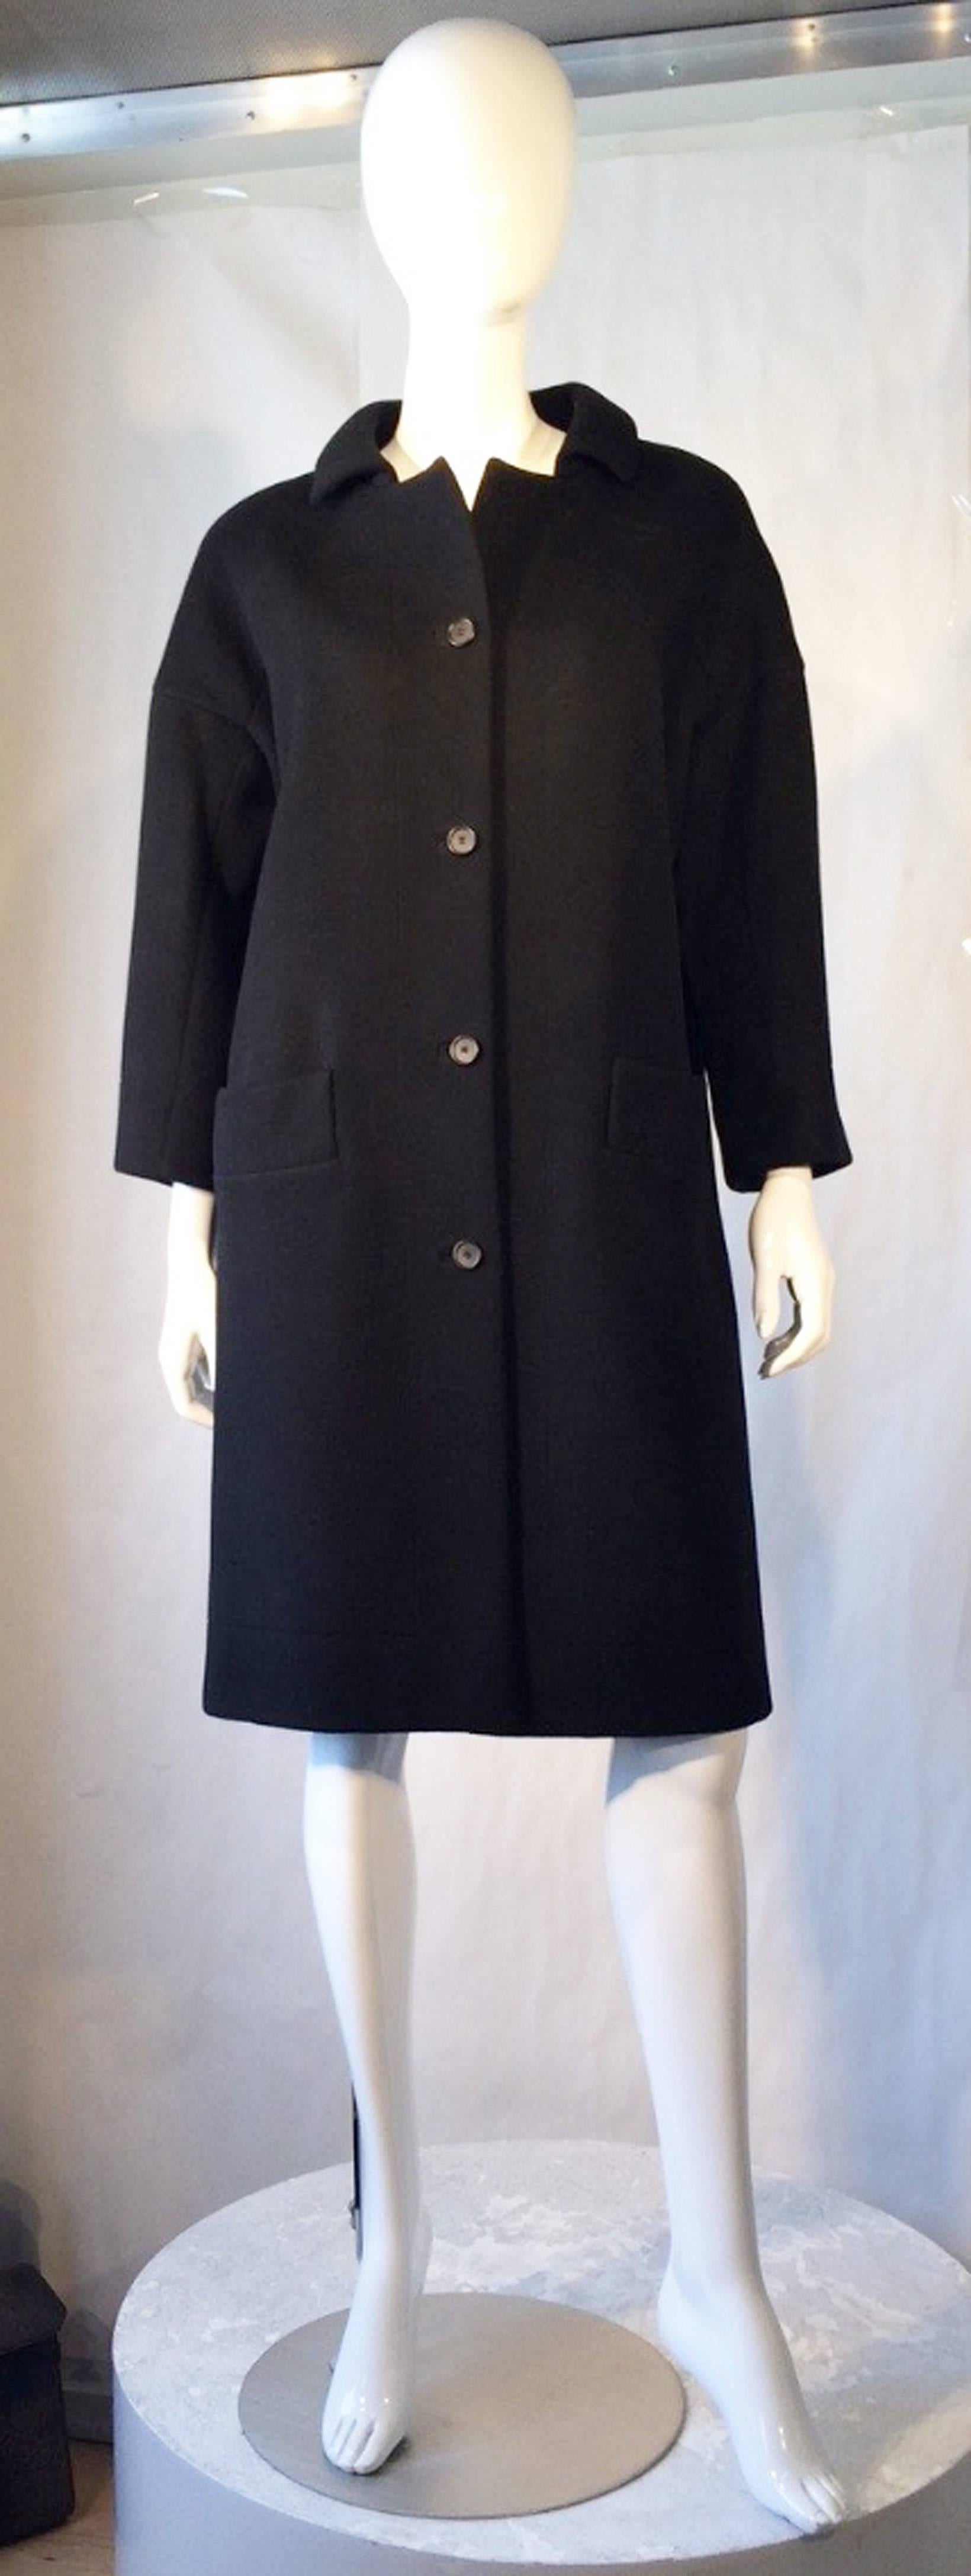 A fine and rare vintage Balenciaga haute couture coat. Authentic client numbered jet black felted wool item features precision seams, button front closures, front side pockets and fully silk lined. Excellent.